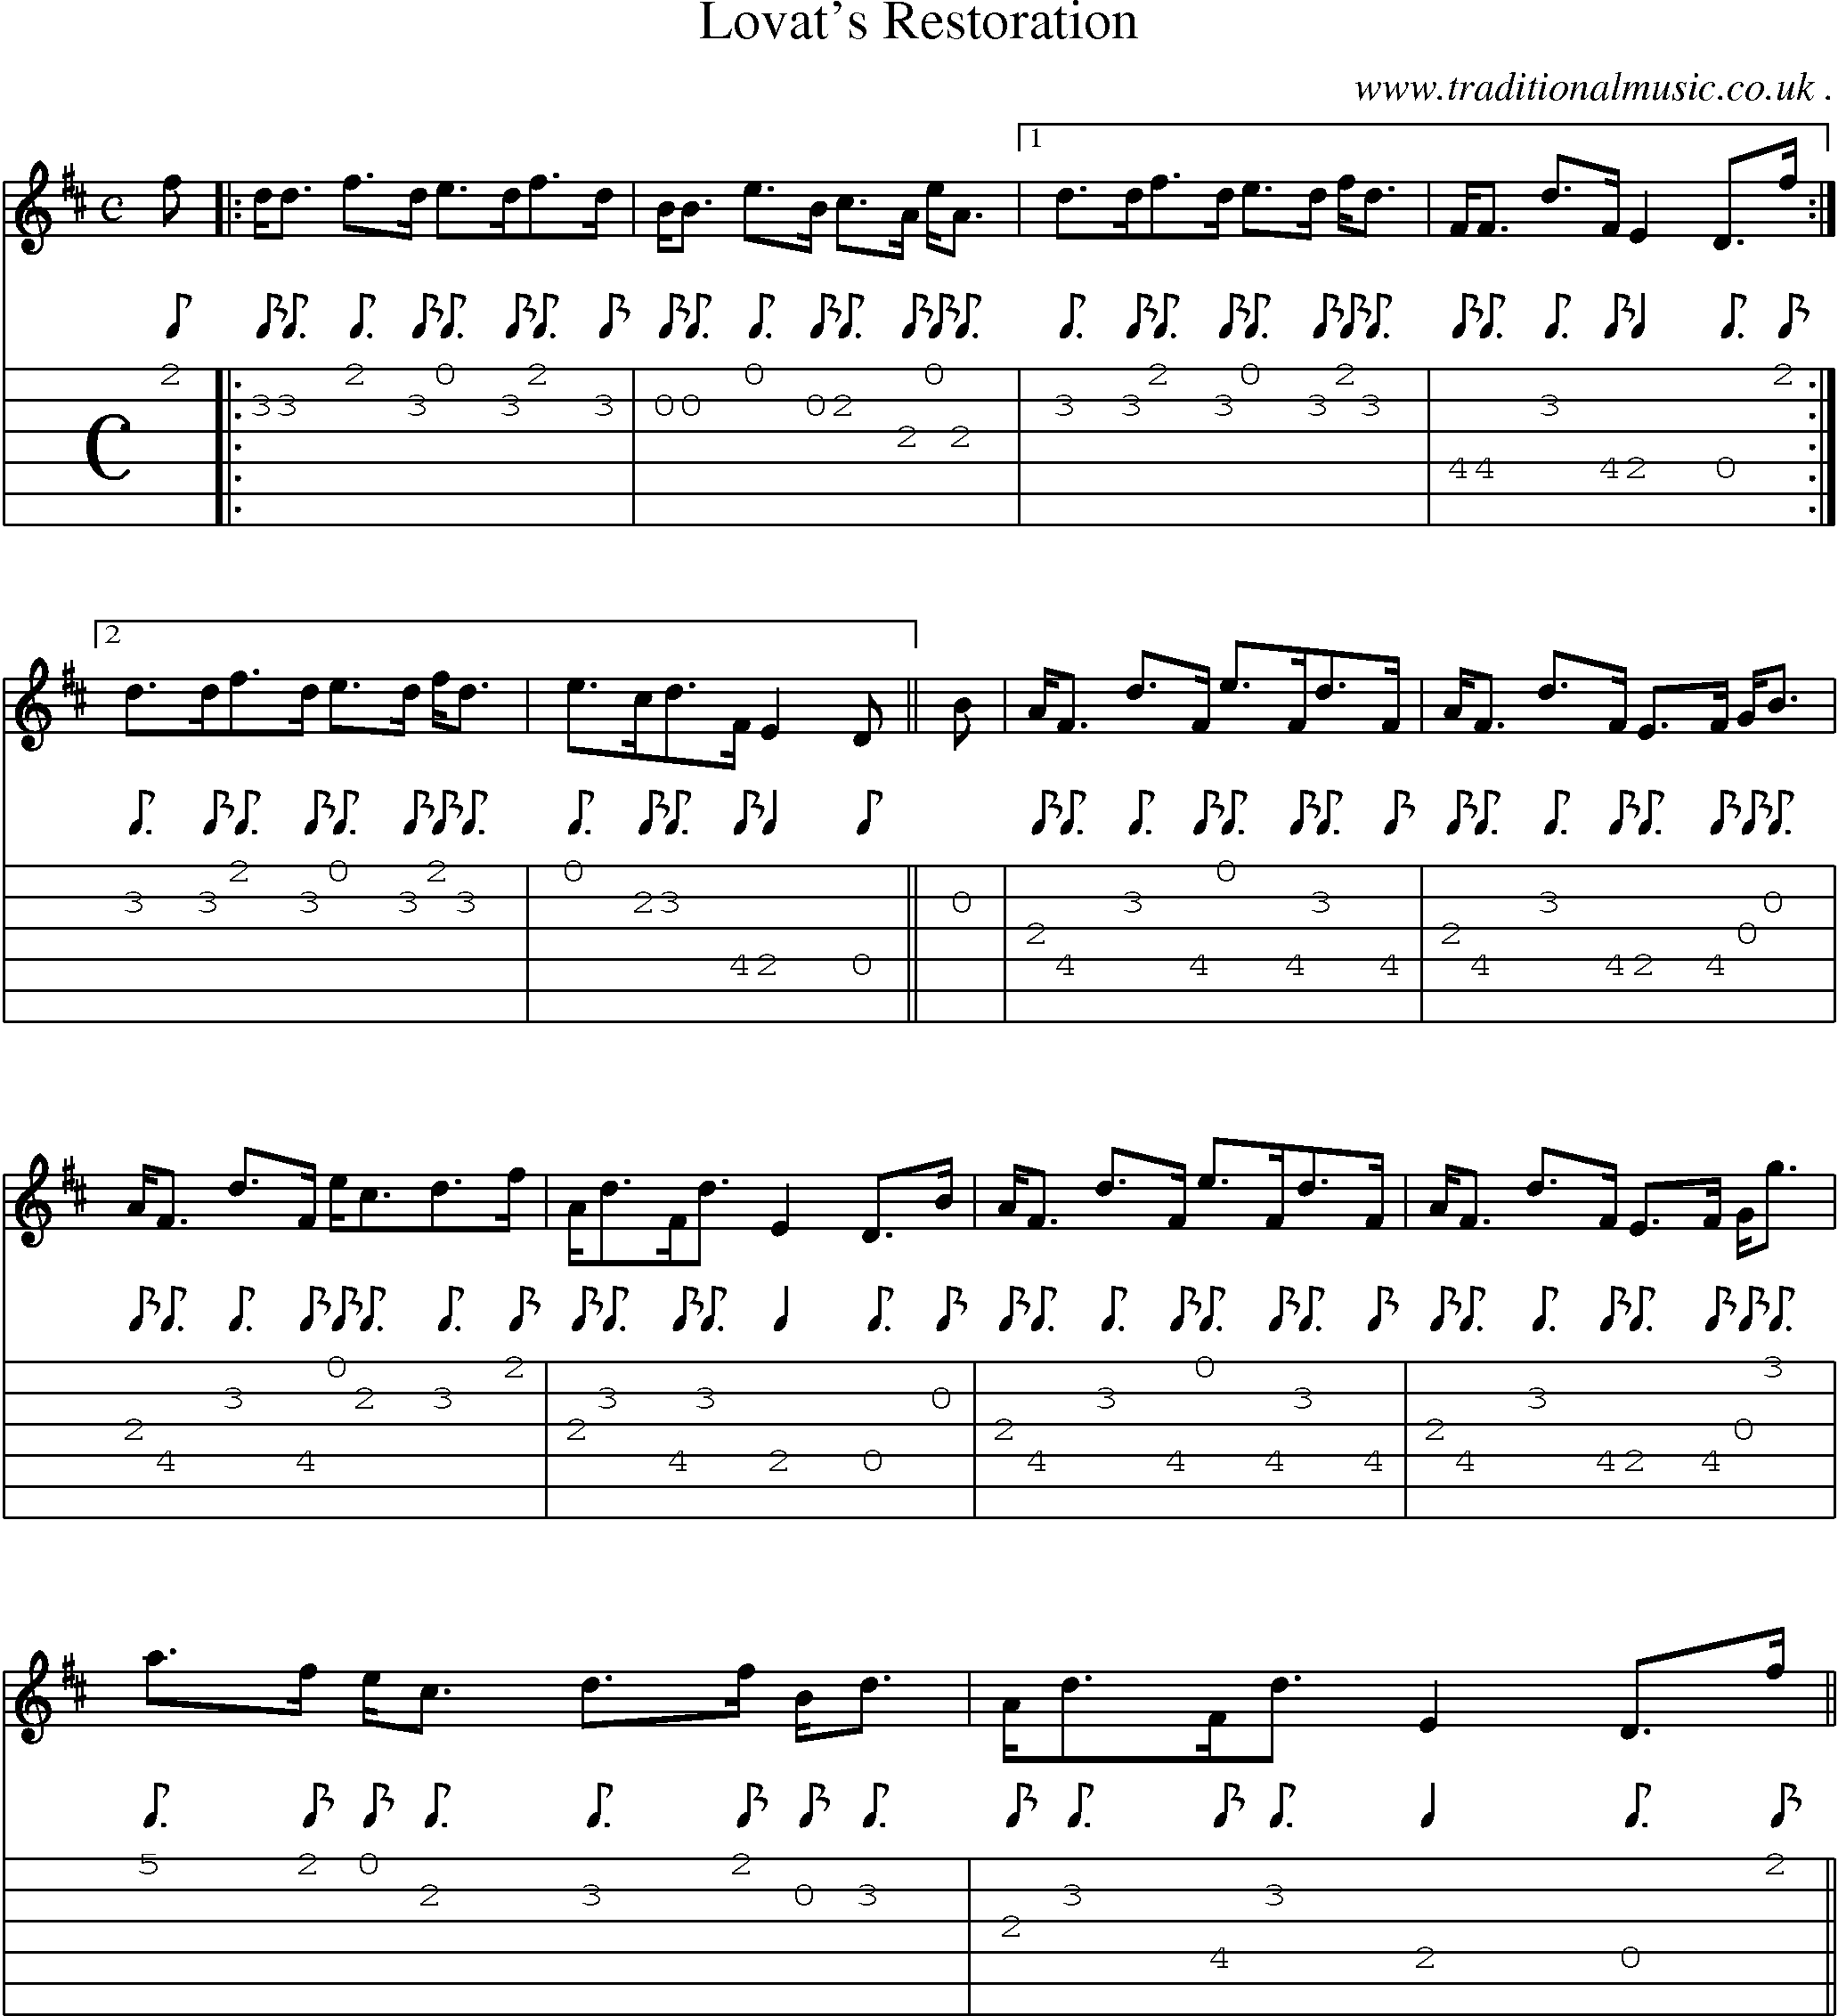 Sheet-music  score, Chords and Guitar Tabs for Lovats Restoration